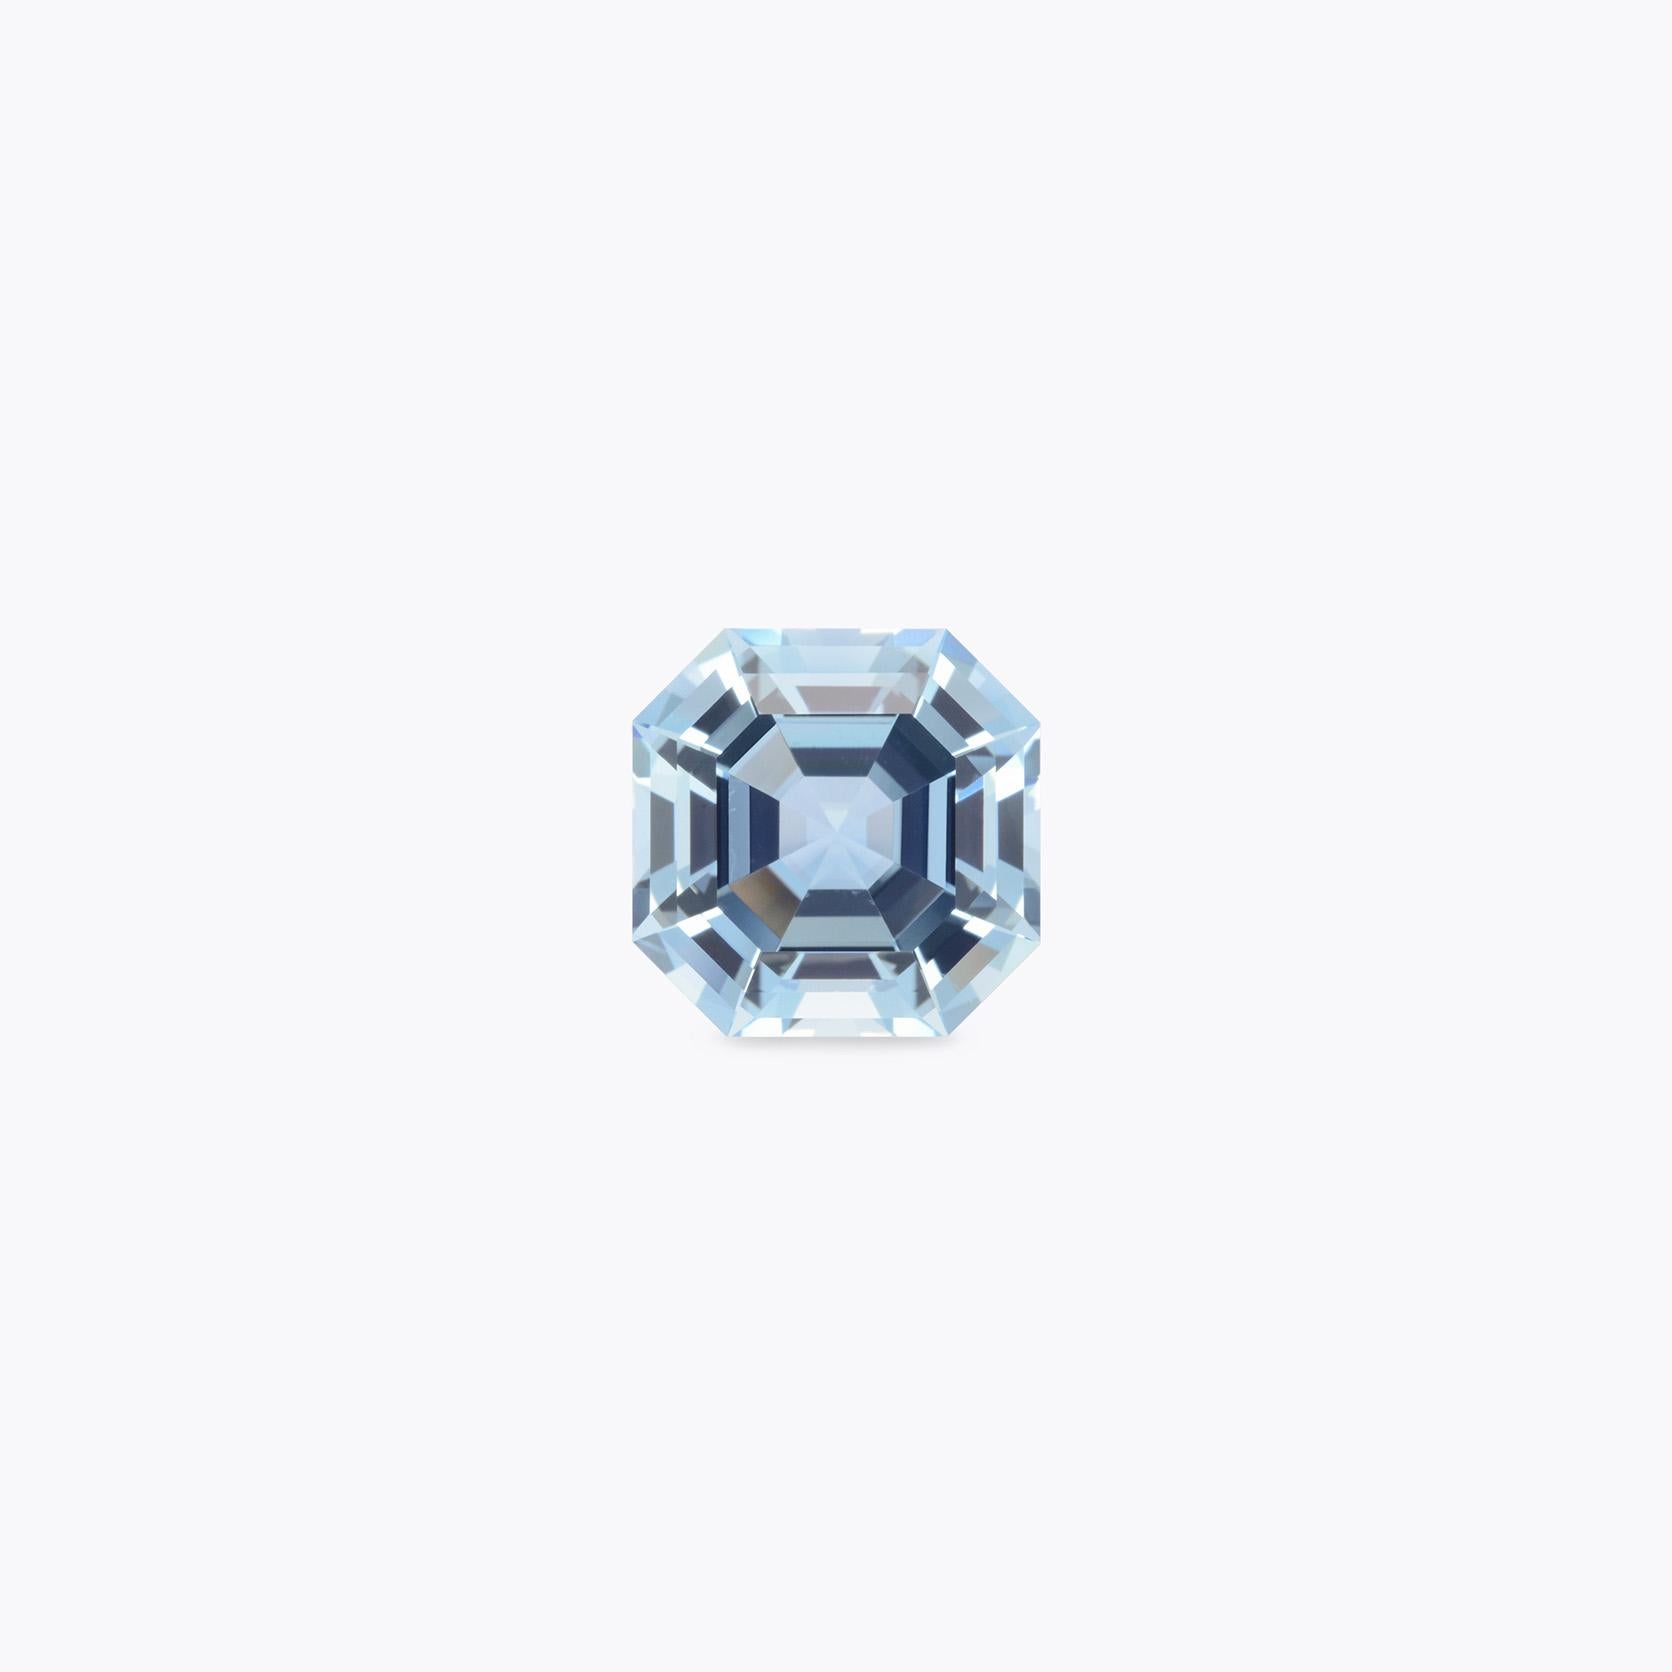 7.48 carat square octagon Aquamarine loose gemstone to be set in a custom made diamond platinum ring, size 7.5, as per the client's instructions.